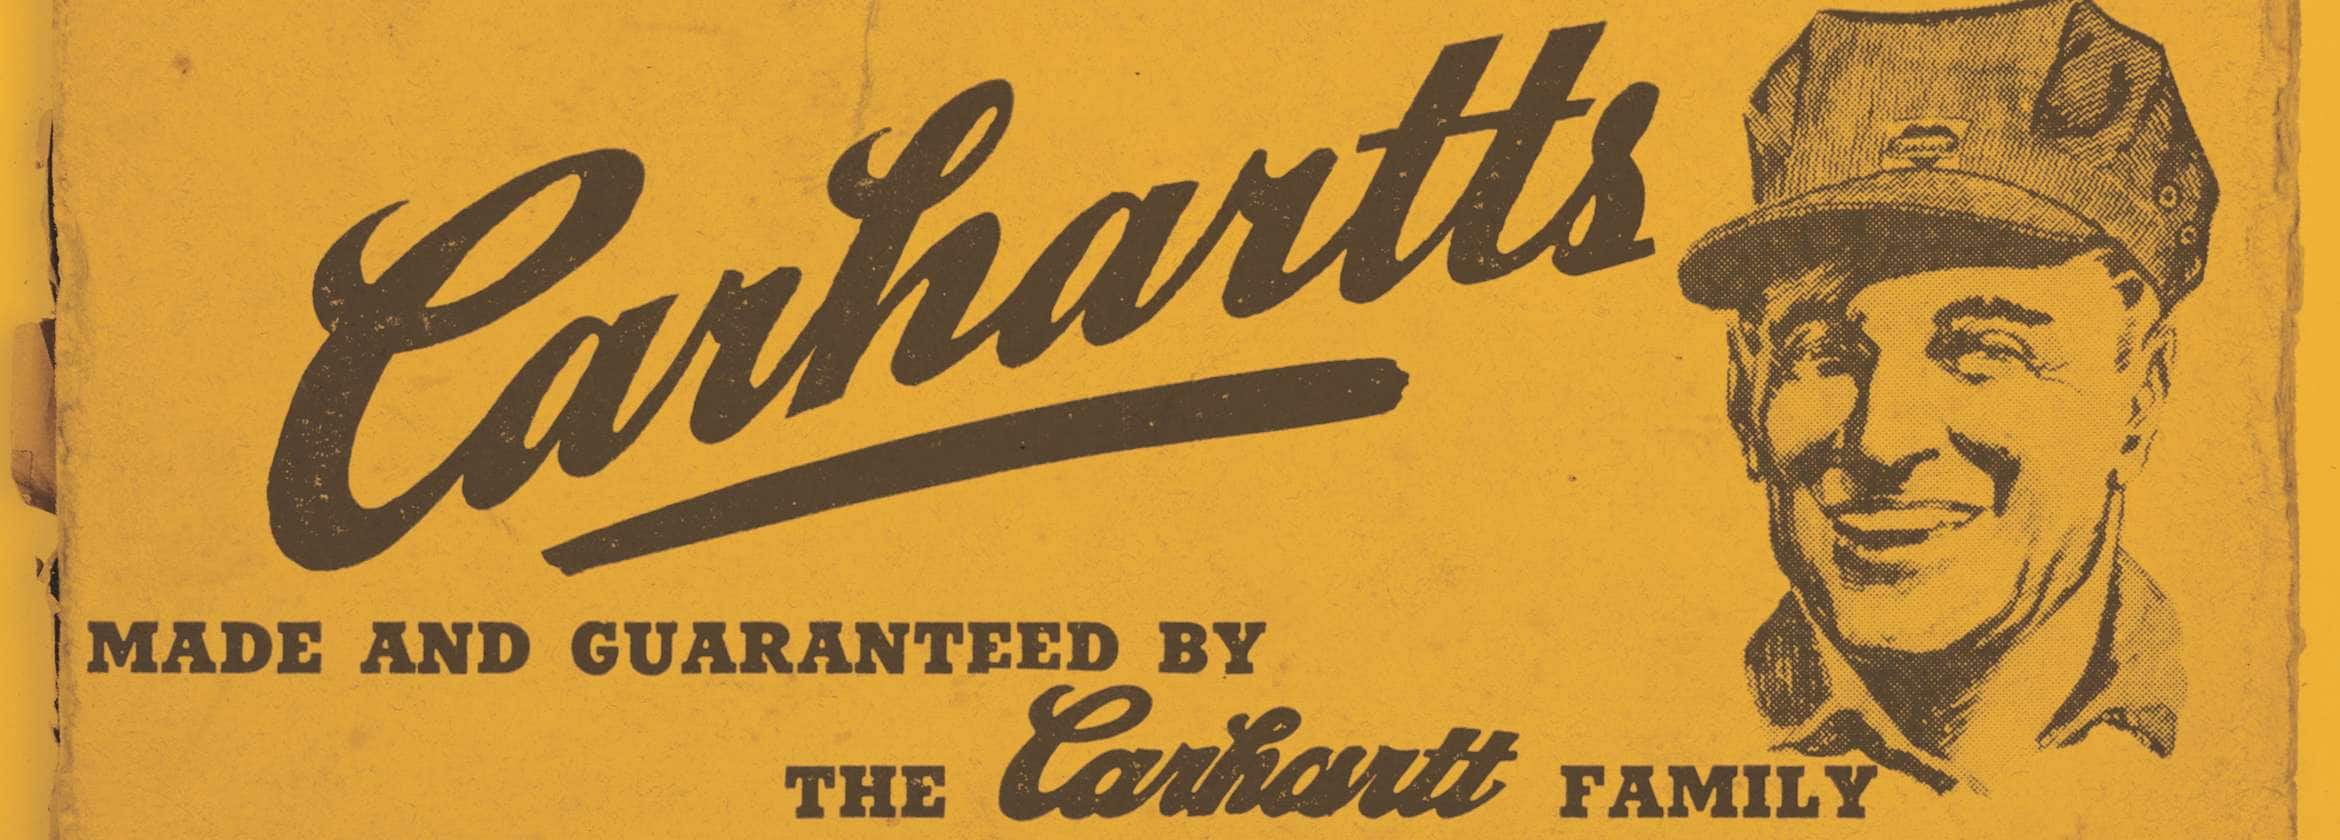 Carhartts. Made and Guaranteed By The Carhartt Family